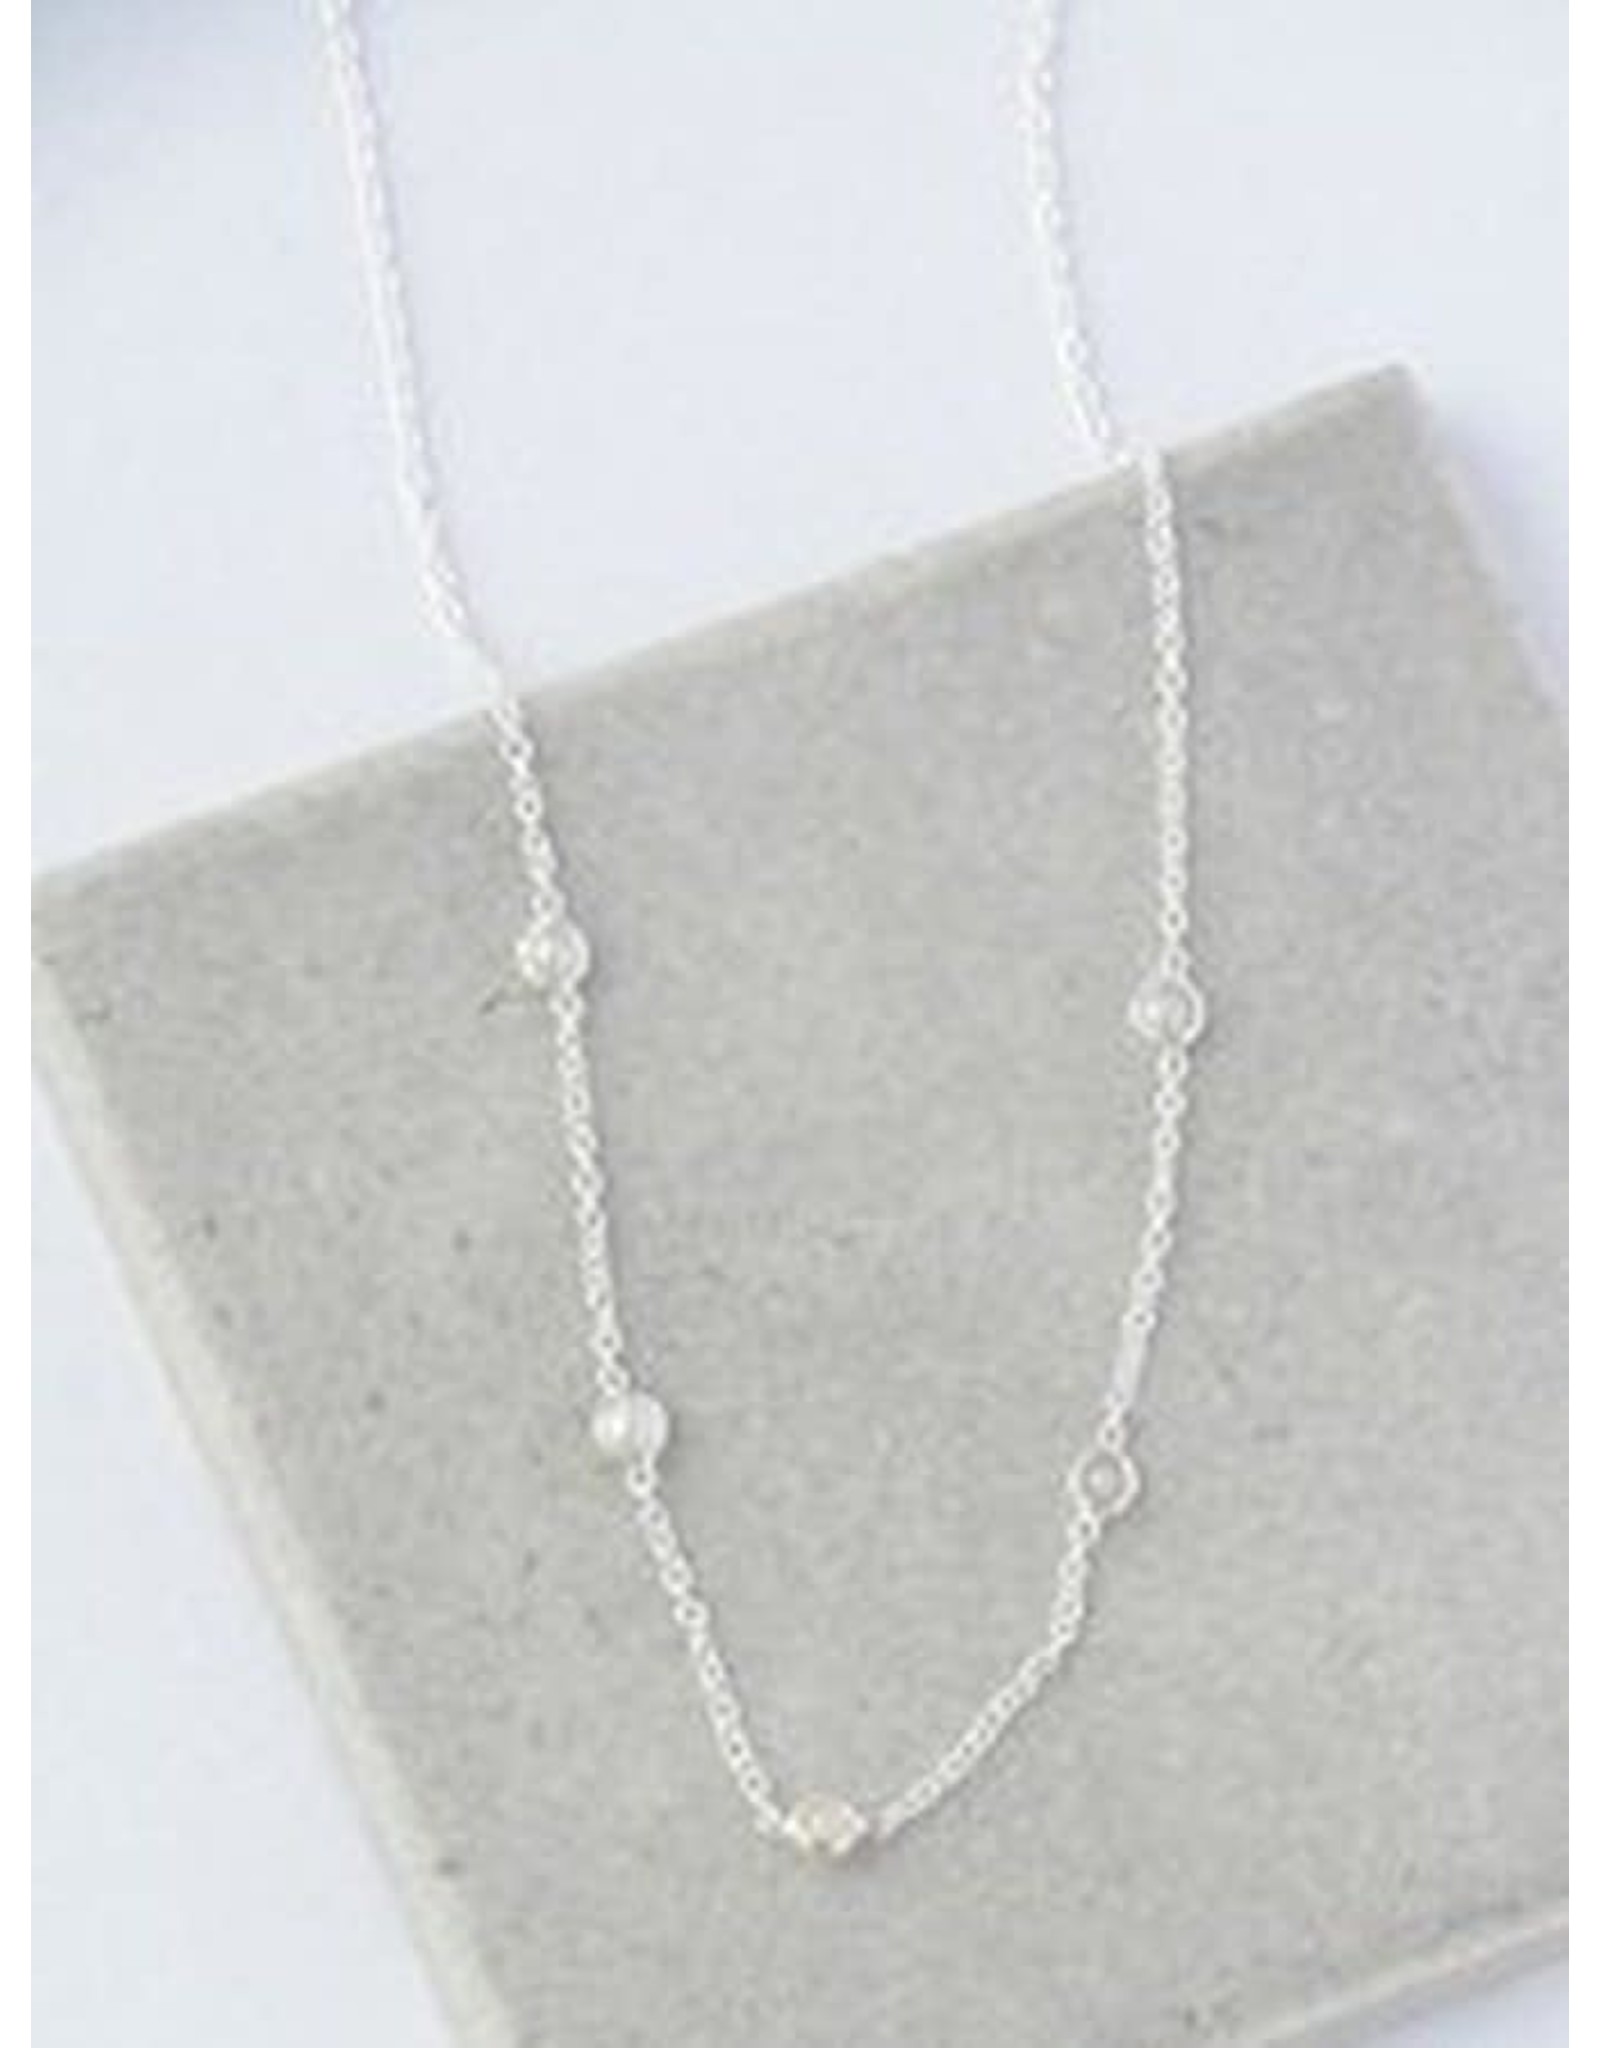 Trade roots Sterling Silver Delicate Pearl Necklace, India